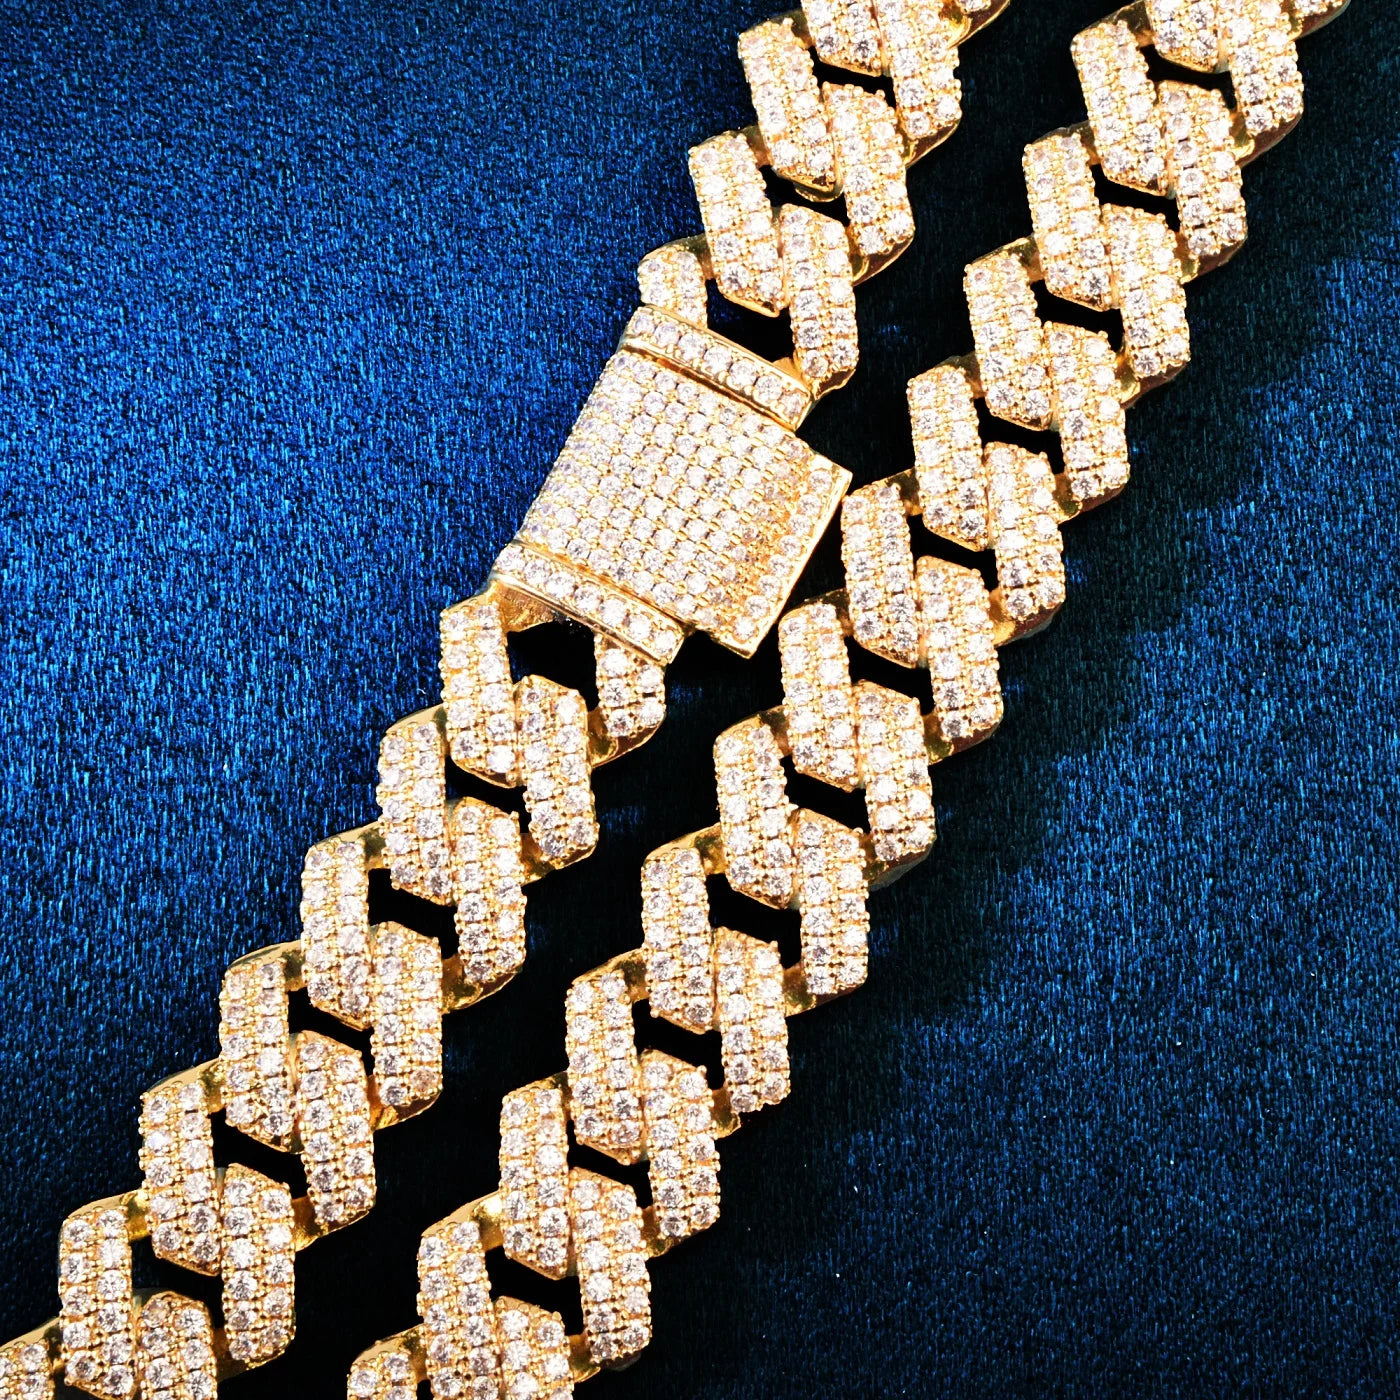 14MM 2 ROWS DIAMOND PRONG CUBAN LINK CHAIN NECKLACE